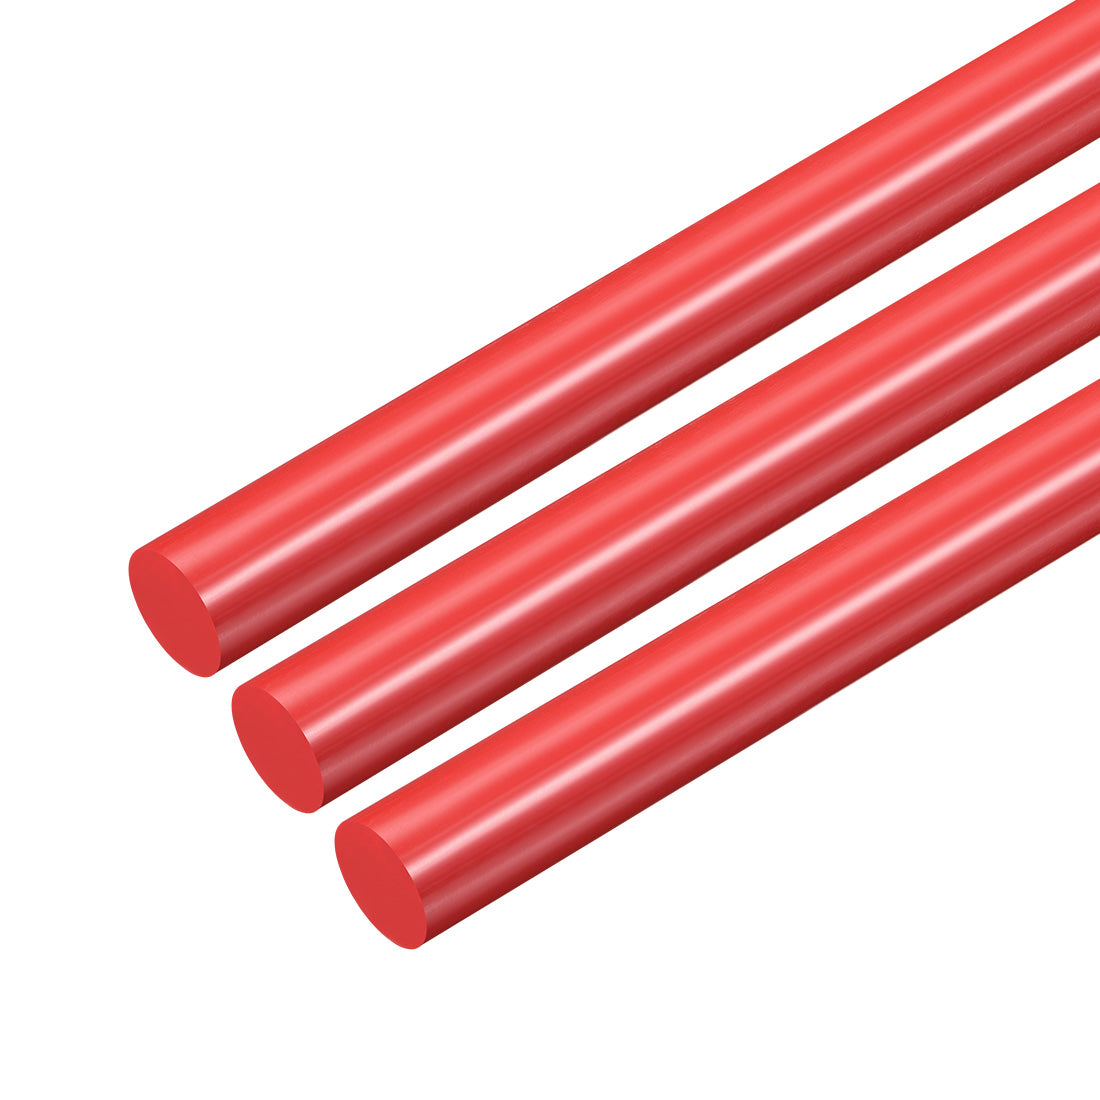 uxcell Uxcell Plastic Round Rod,12mm Dia 50cm Red Engineering Plastic Round Bar 3pcs